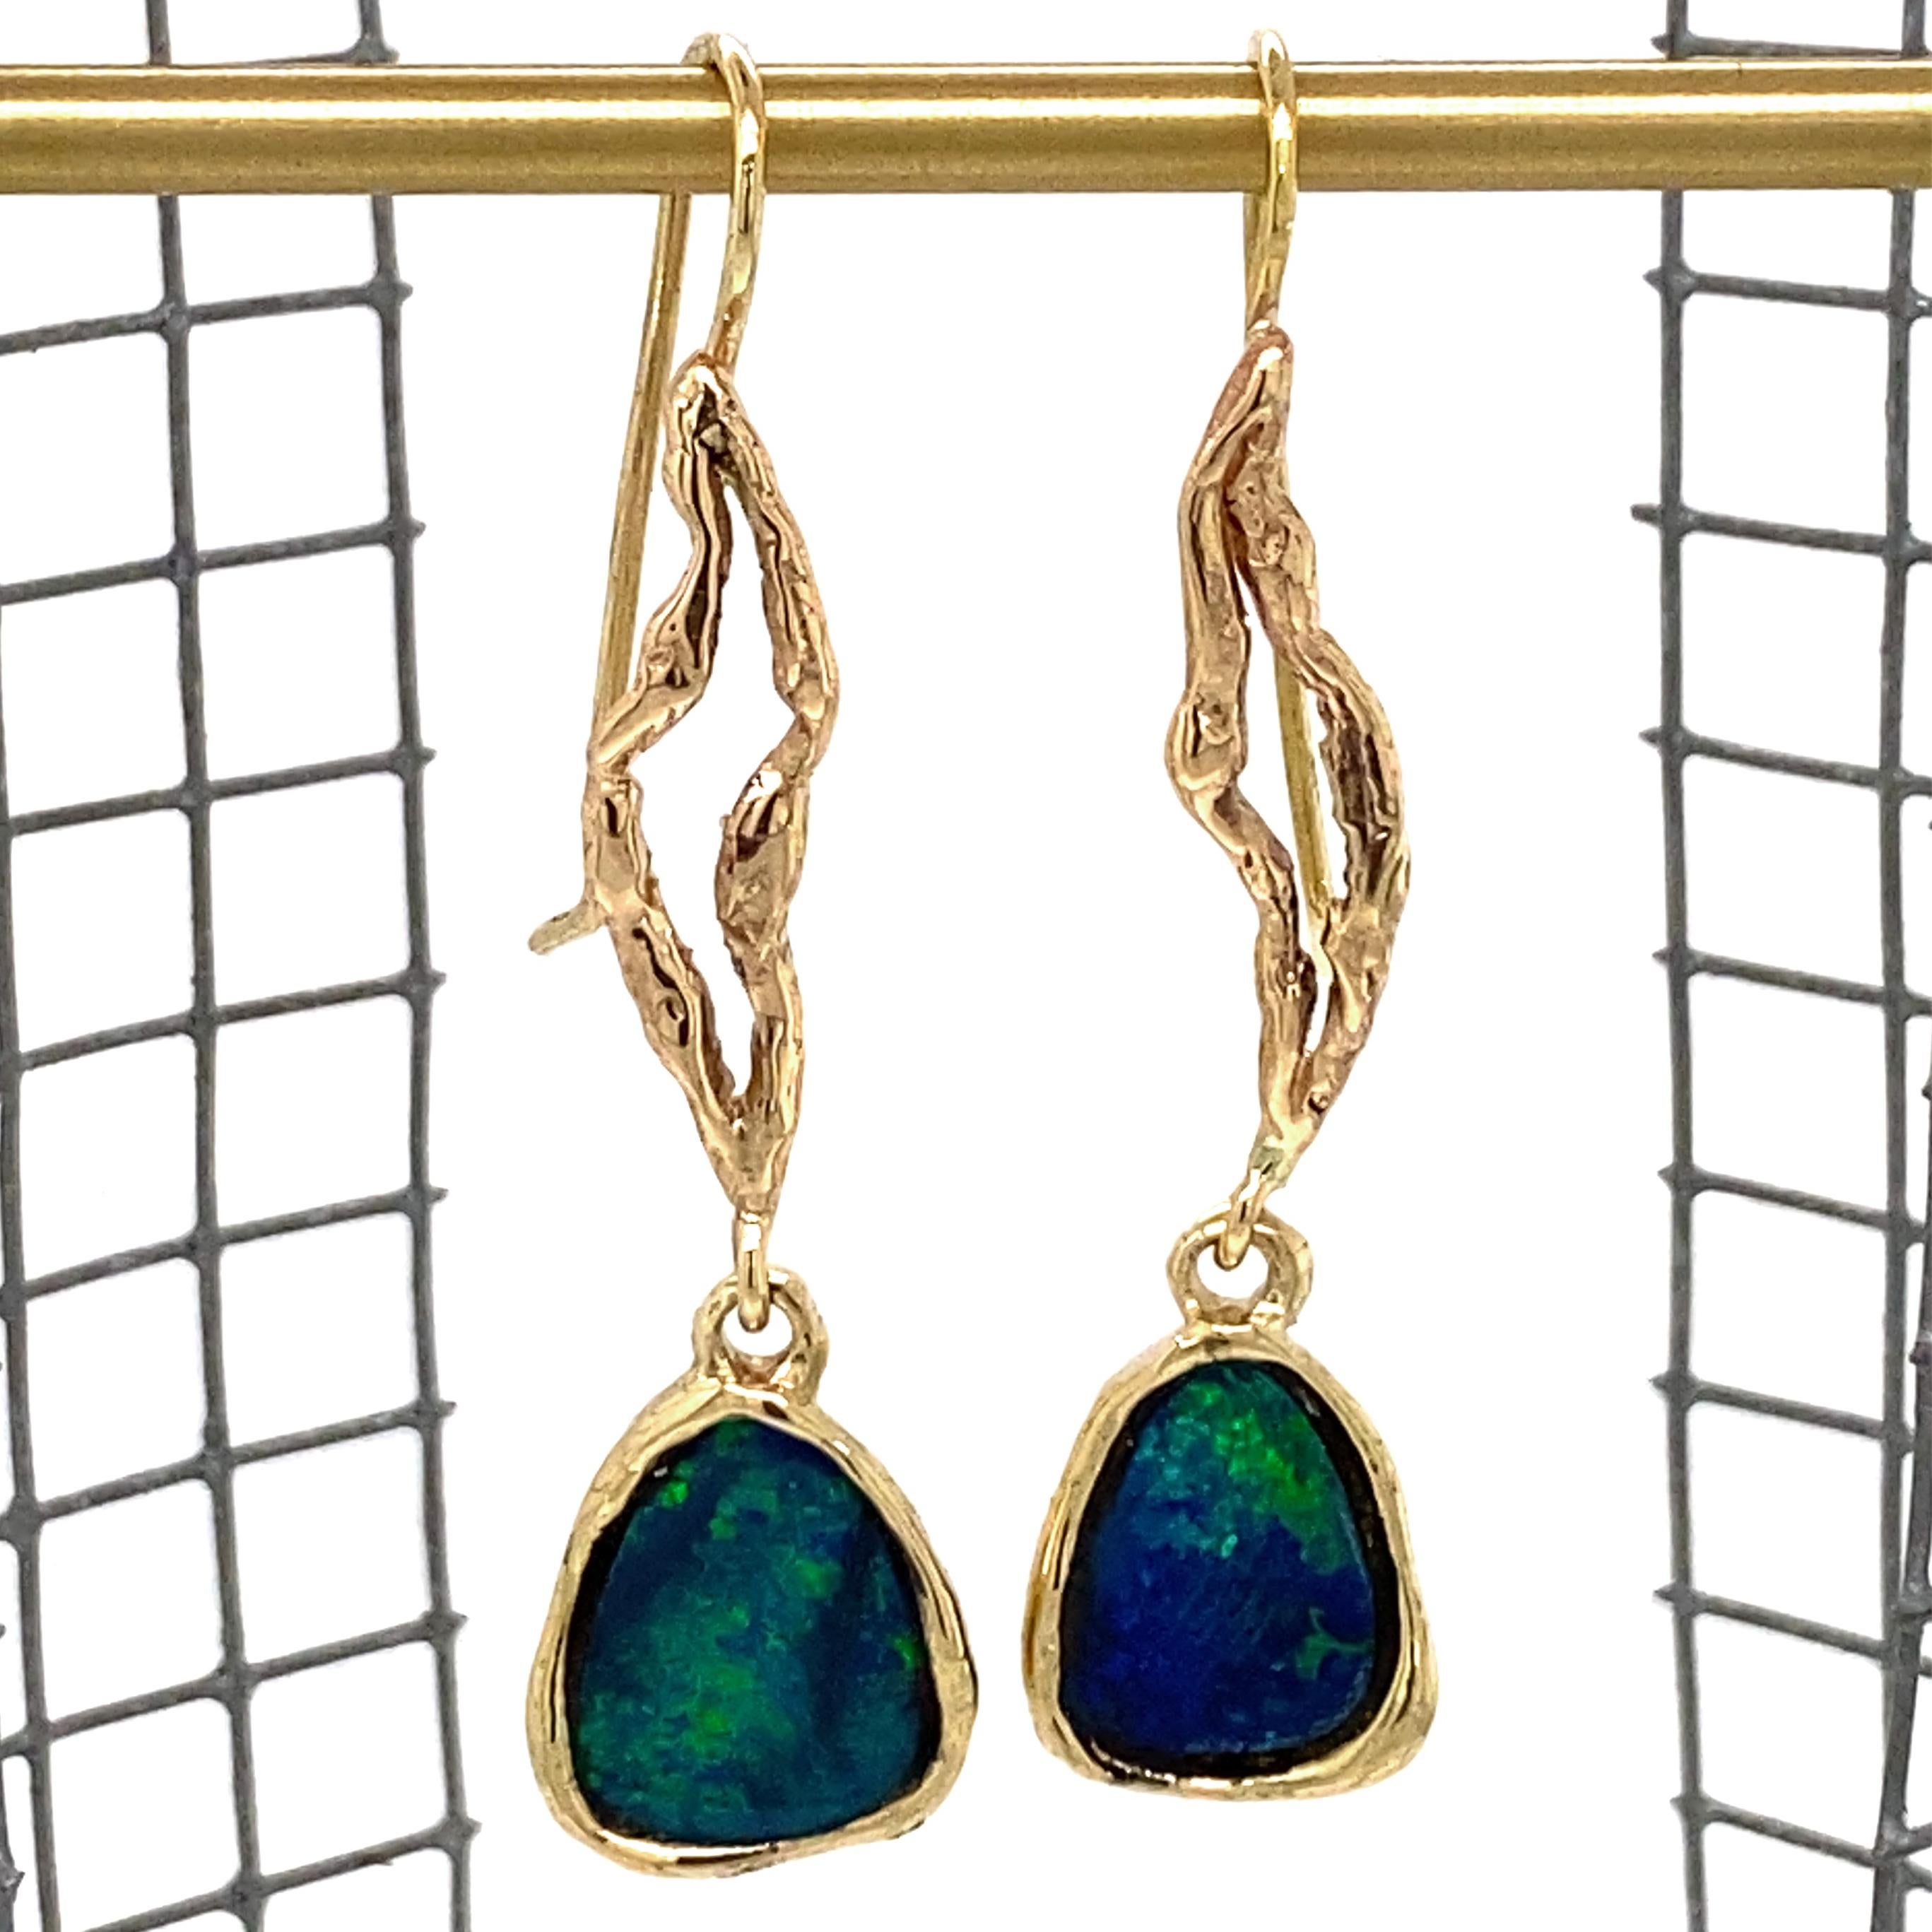 Two fiery blue and green Australian boulder opals seem to drip from strands of gold to create a pair of beautiful earrings by Eytan Brandes.

Each opal is roughly triangular in shape, approximately 11mm long and 8mm wide.  The stones are encased in